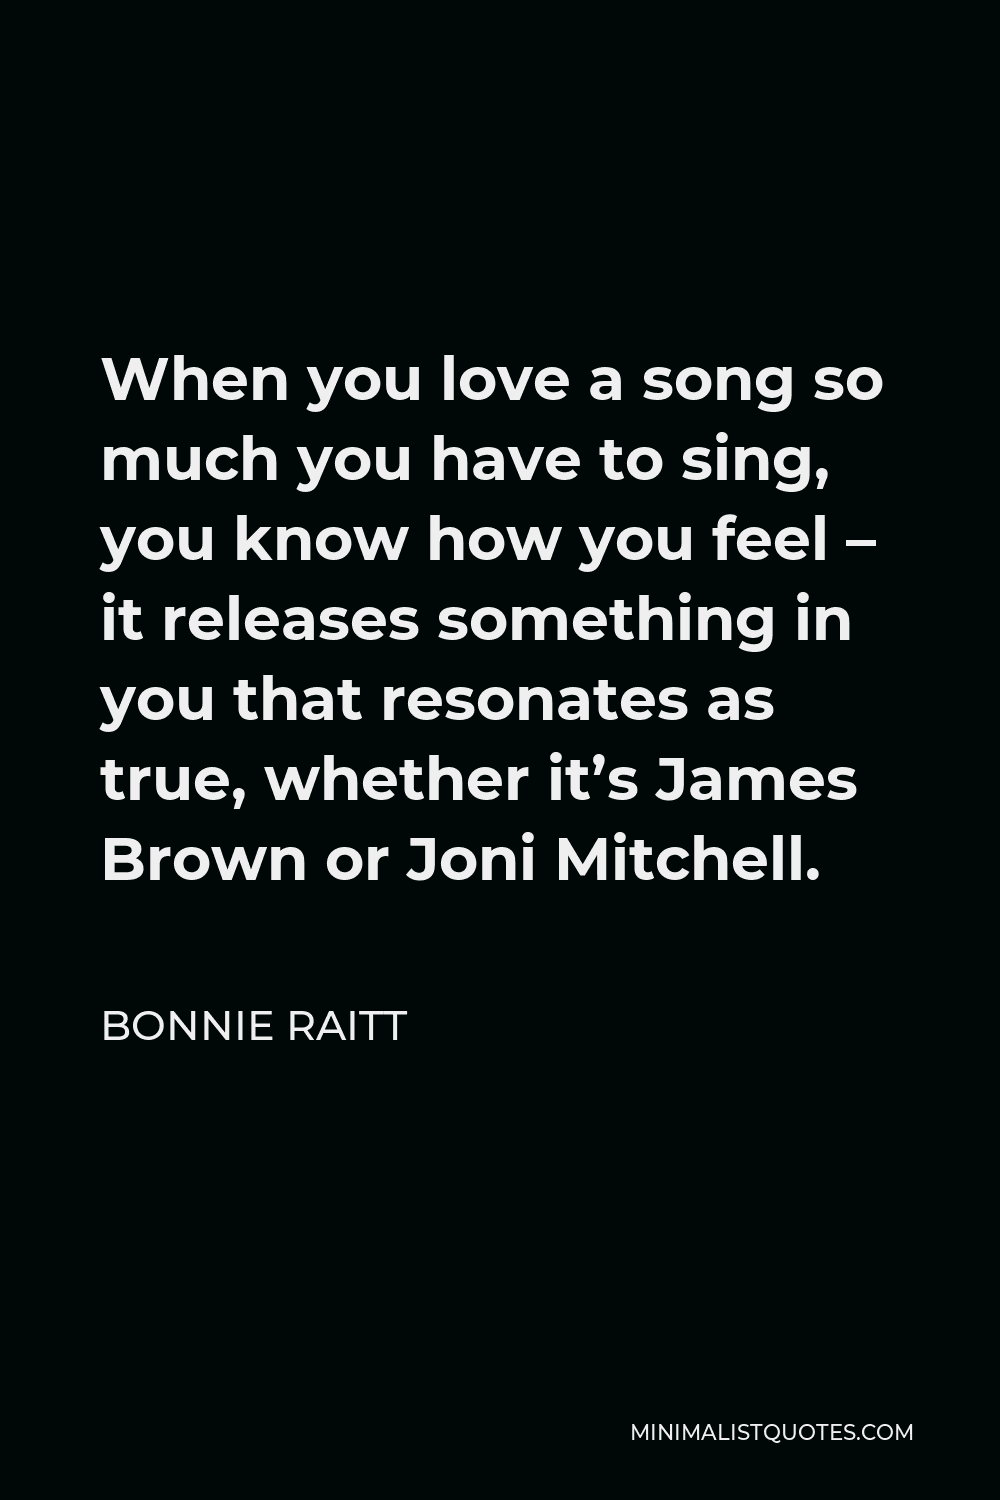 Bonnie Raitt Quote - When you love a song so much you have to sing, you know how you feel – it releases something in you that resonates as true, whether it’s James Brown or Joni Mitchell.